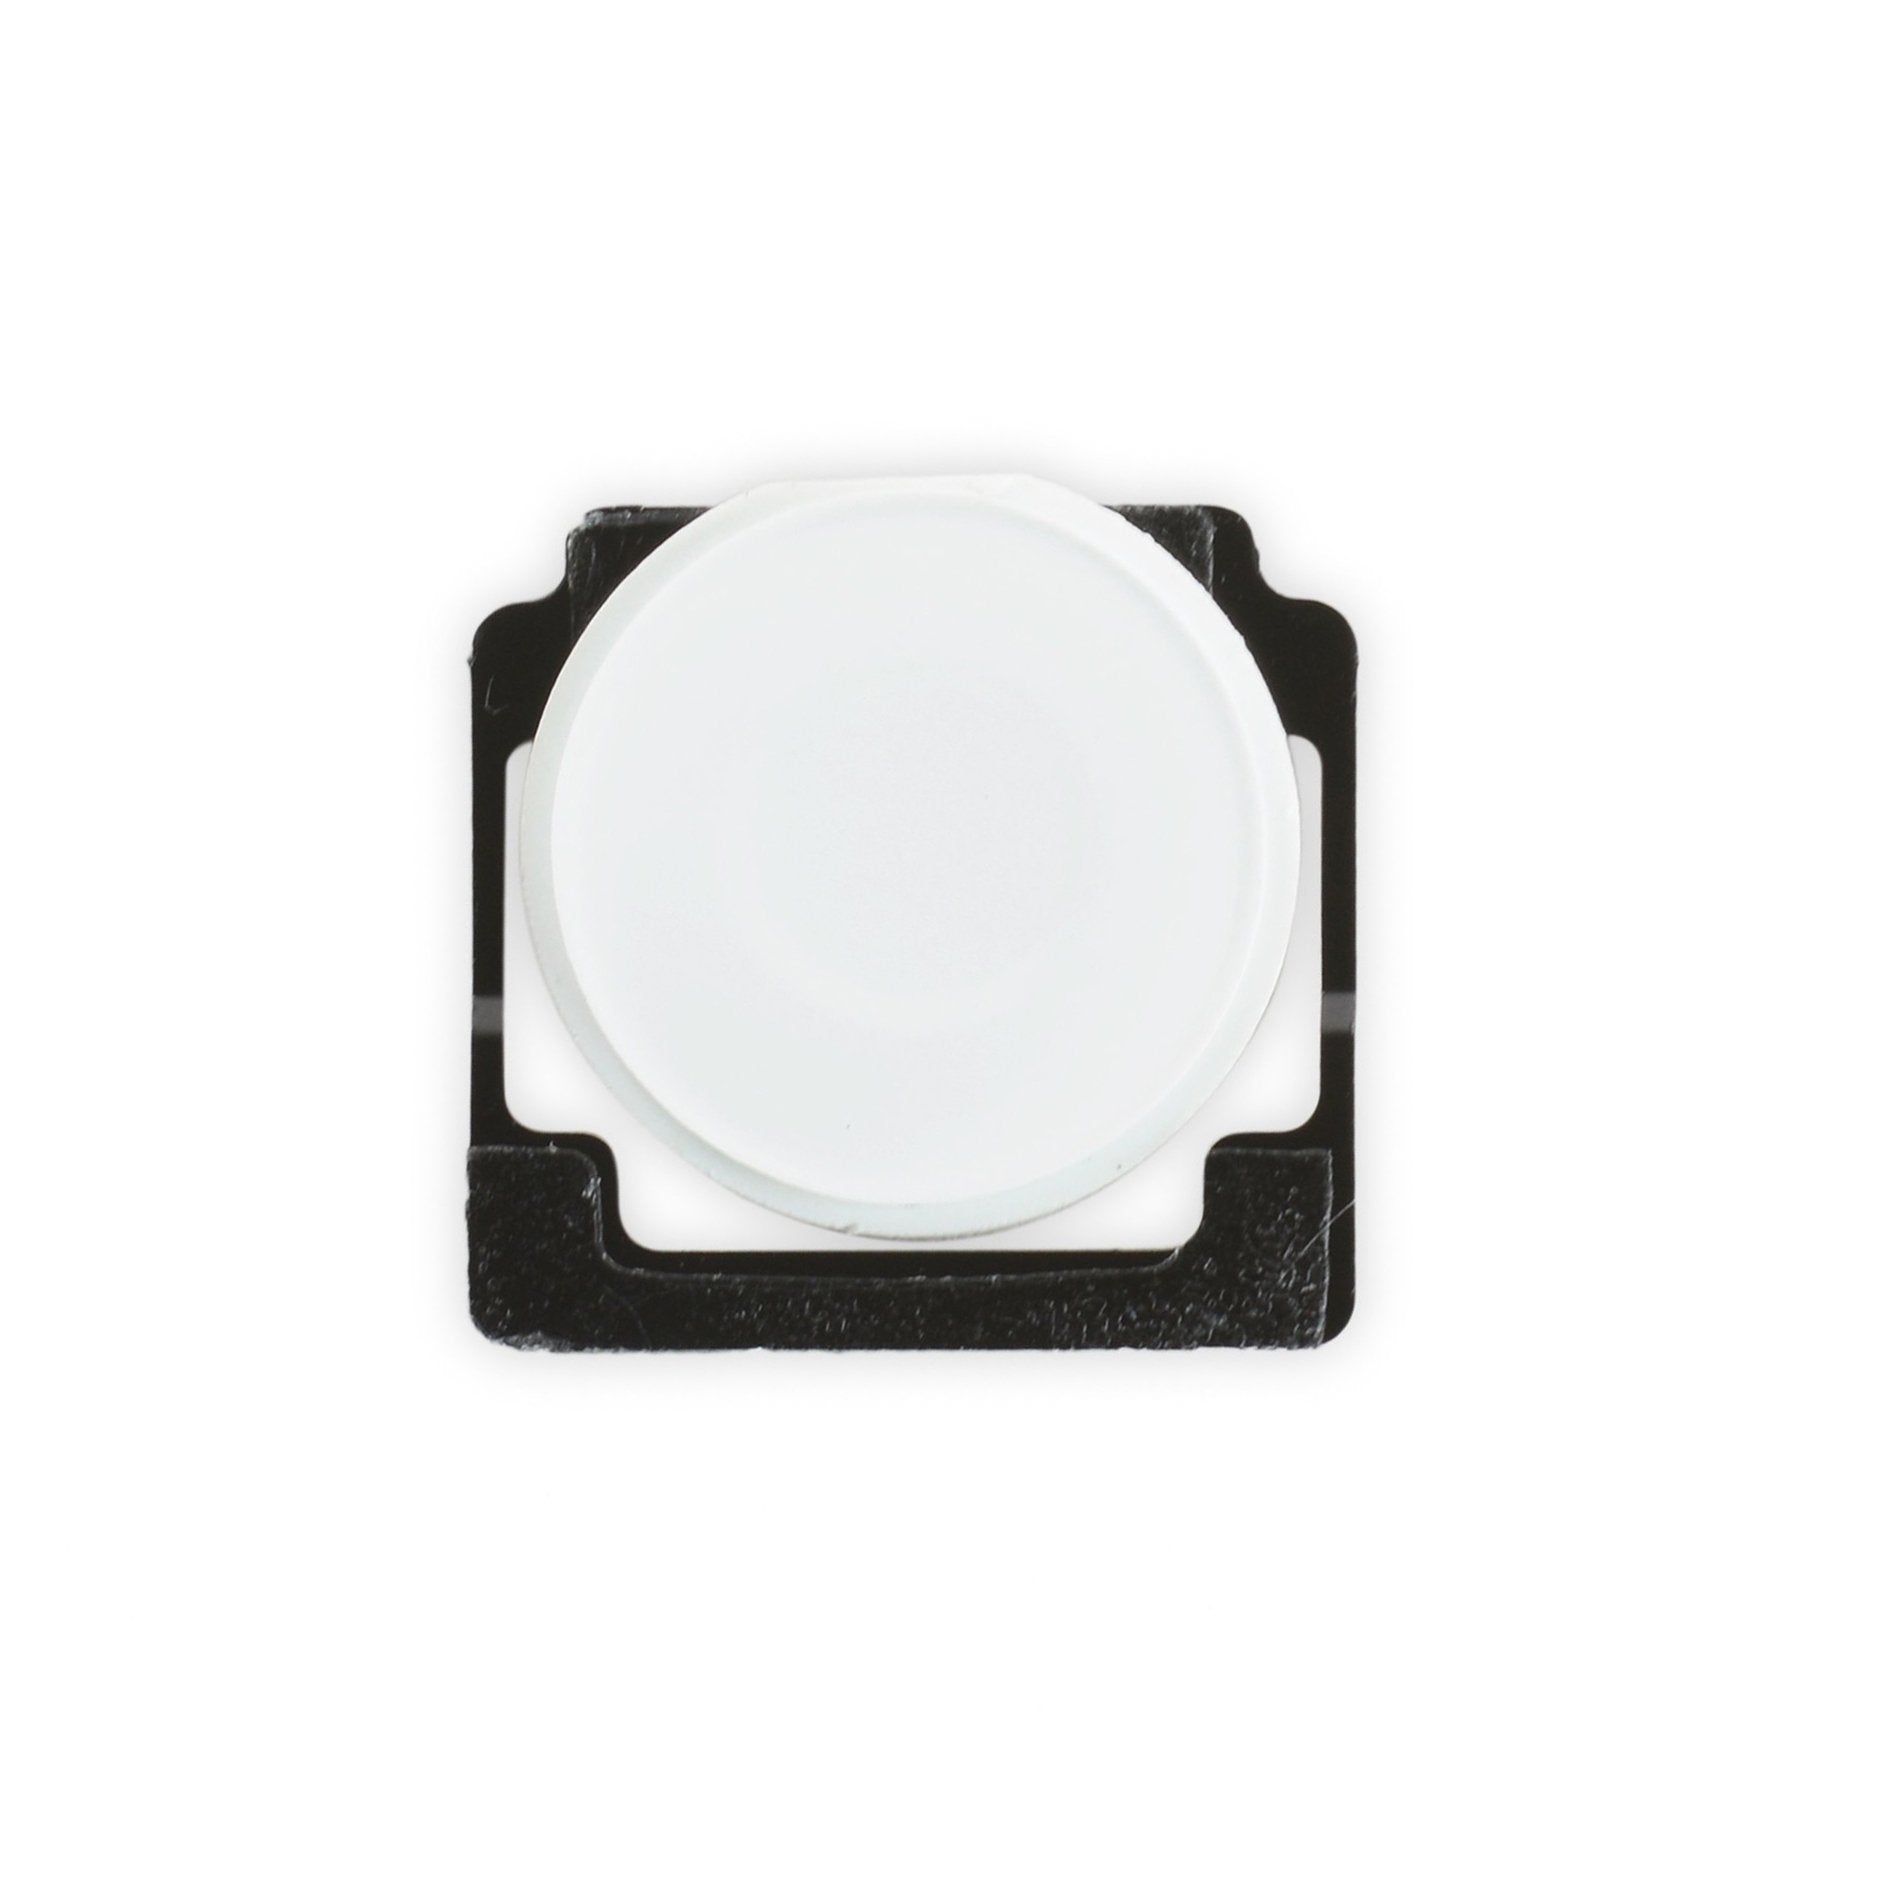 iPad 2/3/4 Home Button with Spring White New